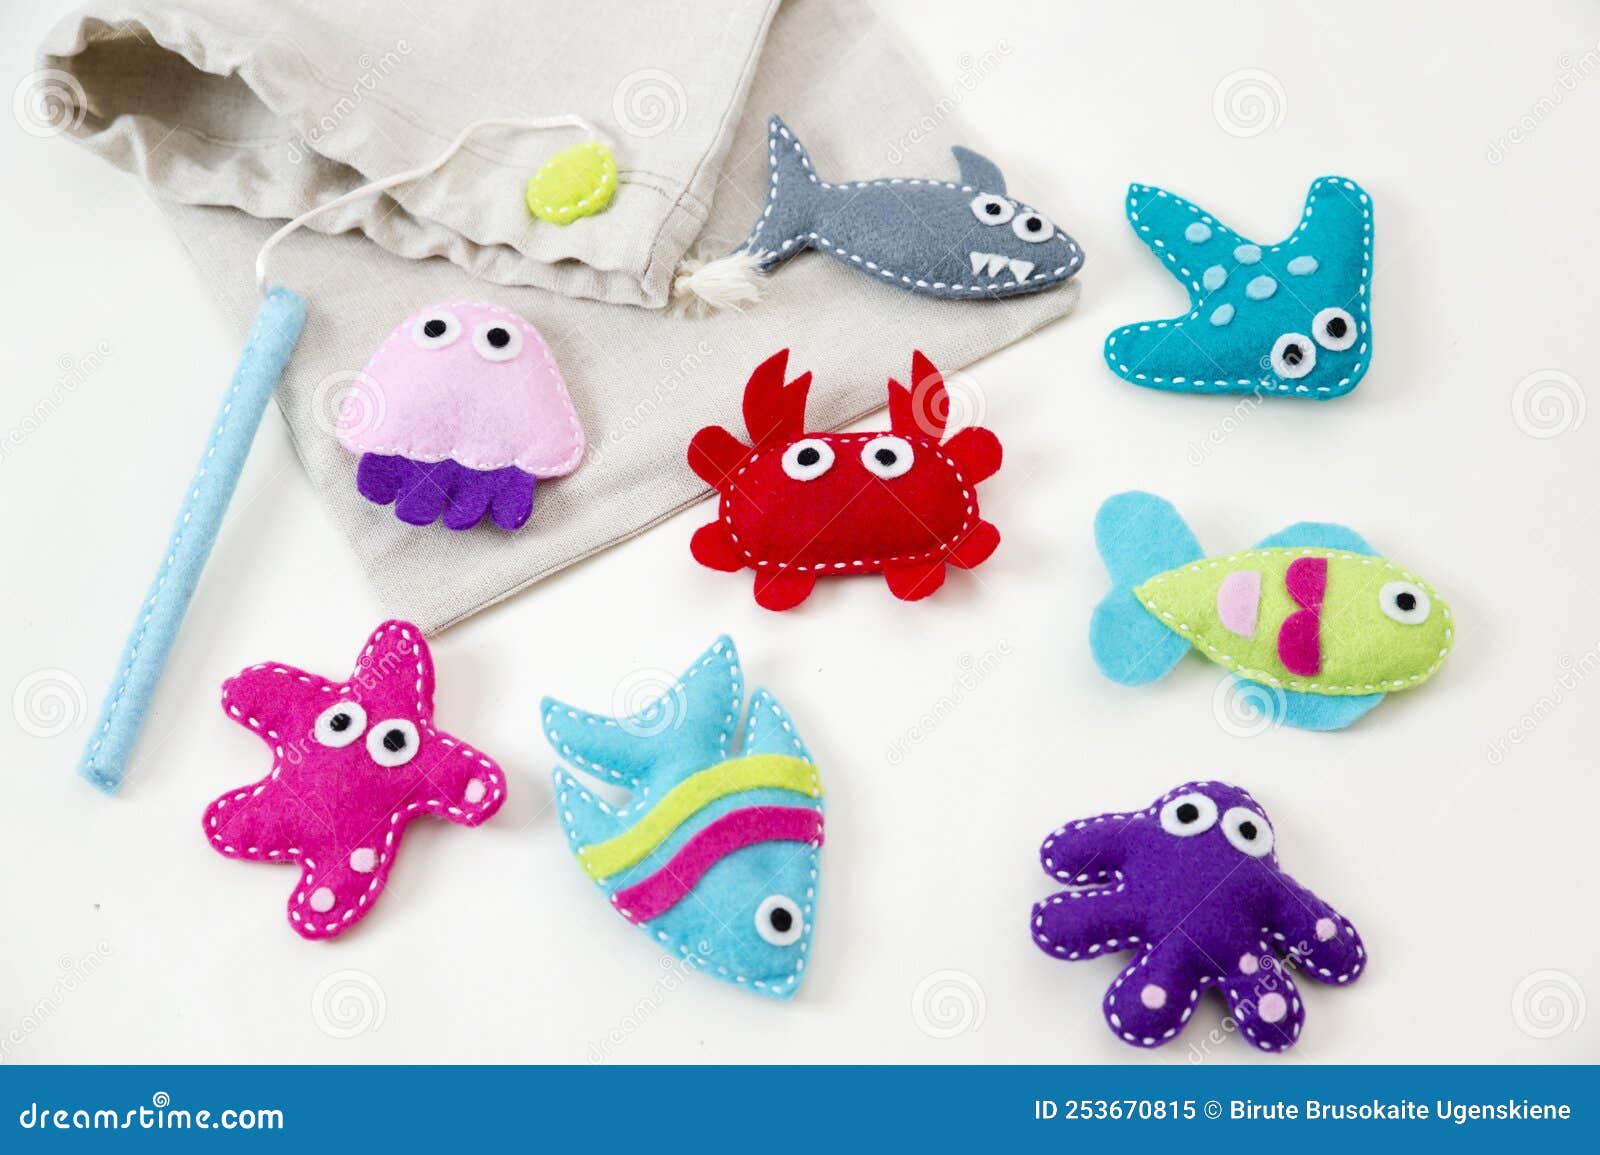 https://thumbs.dreamstime.com/z/hand-made-stuffed-felt-toy-fishing-rod-magnet-fishes-other-sea-animals-different-colors-safe-eco-stuffed-toy-253670815.jpg